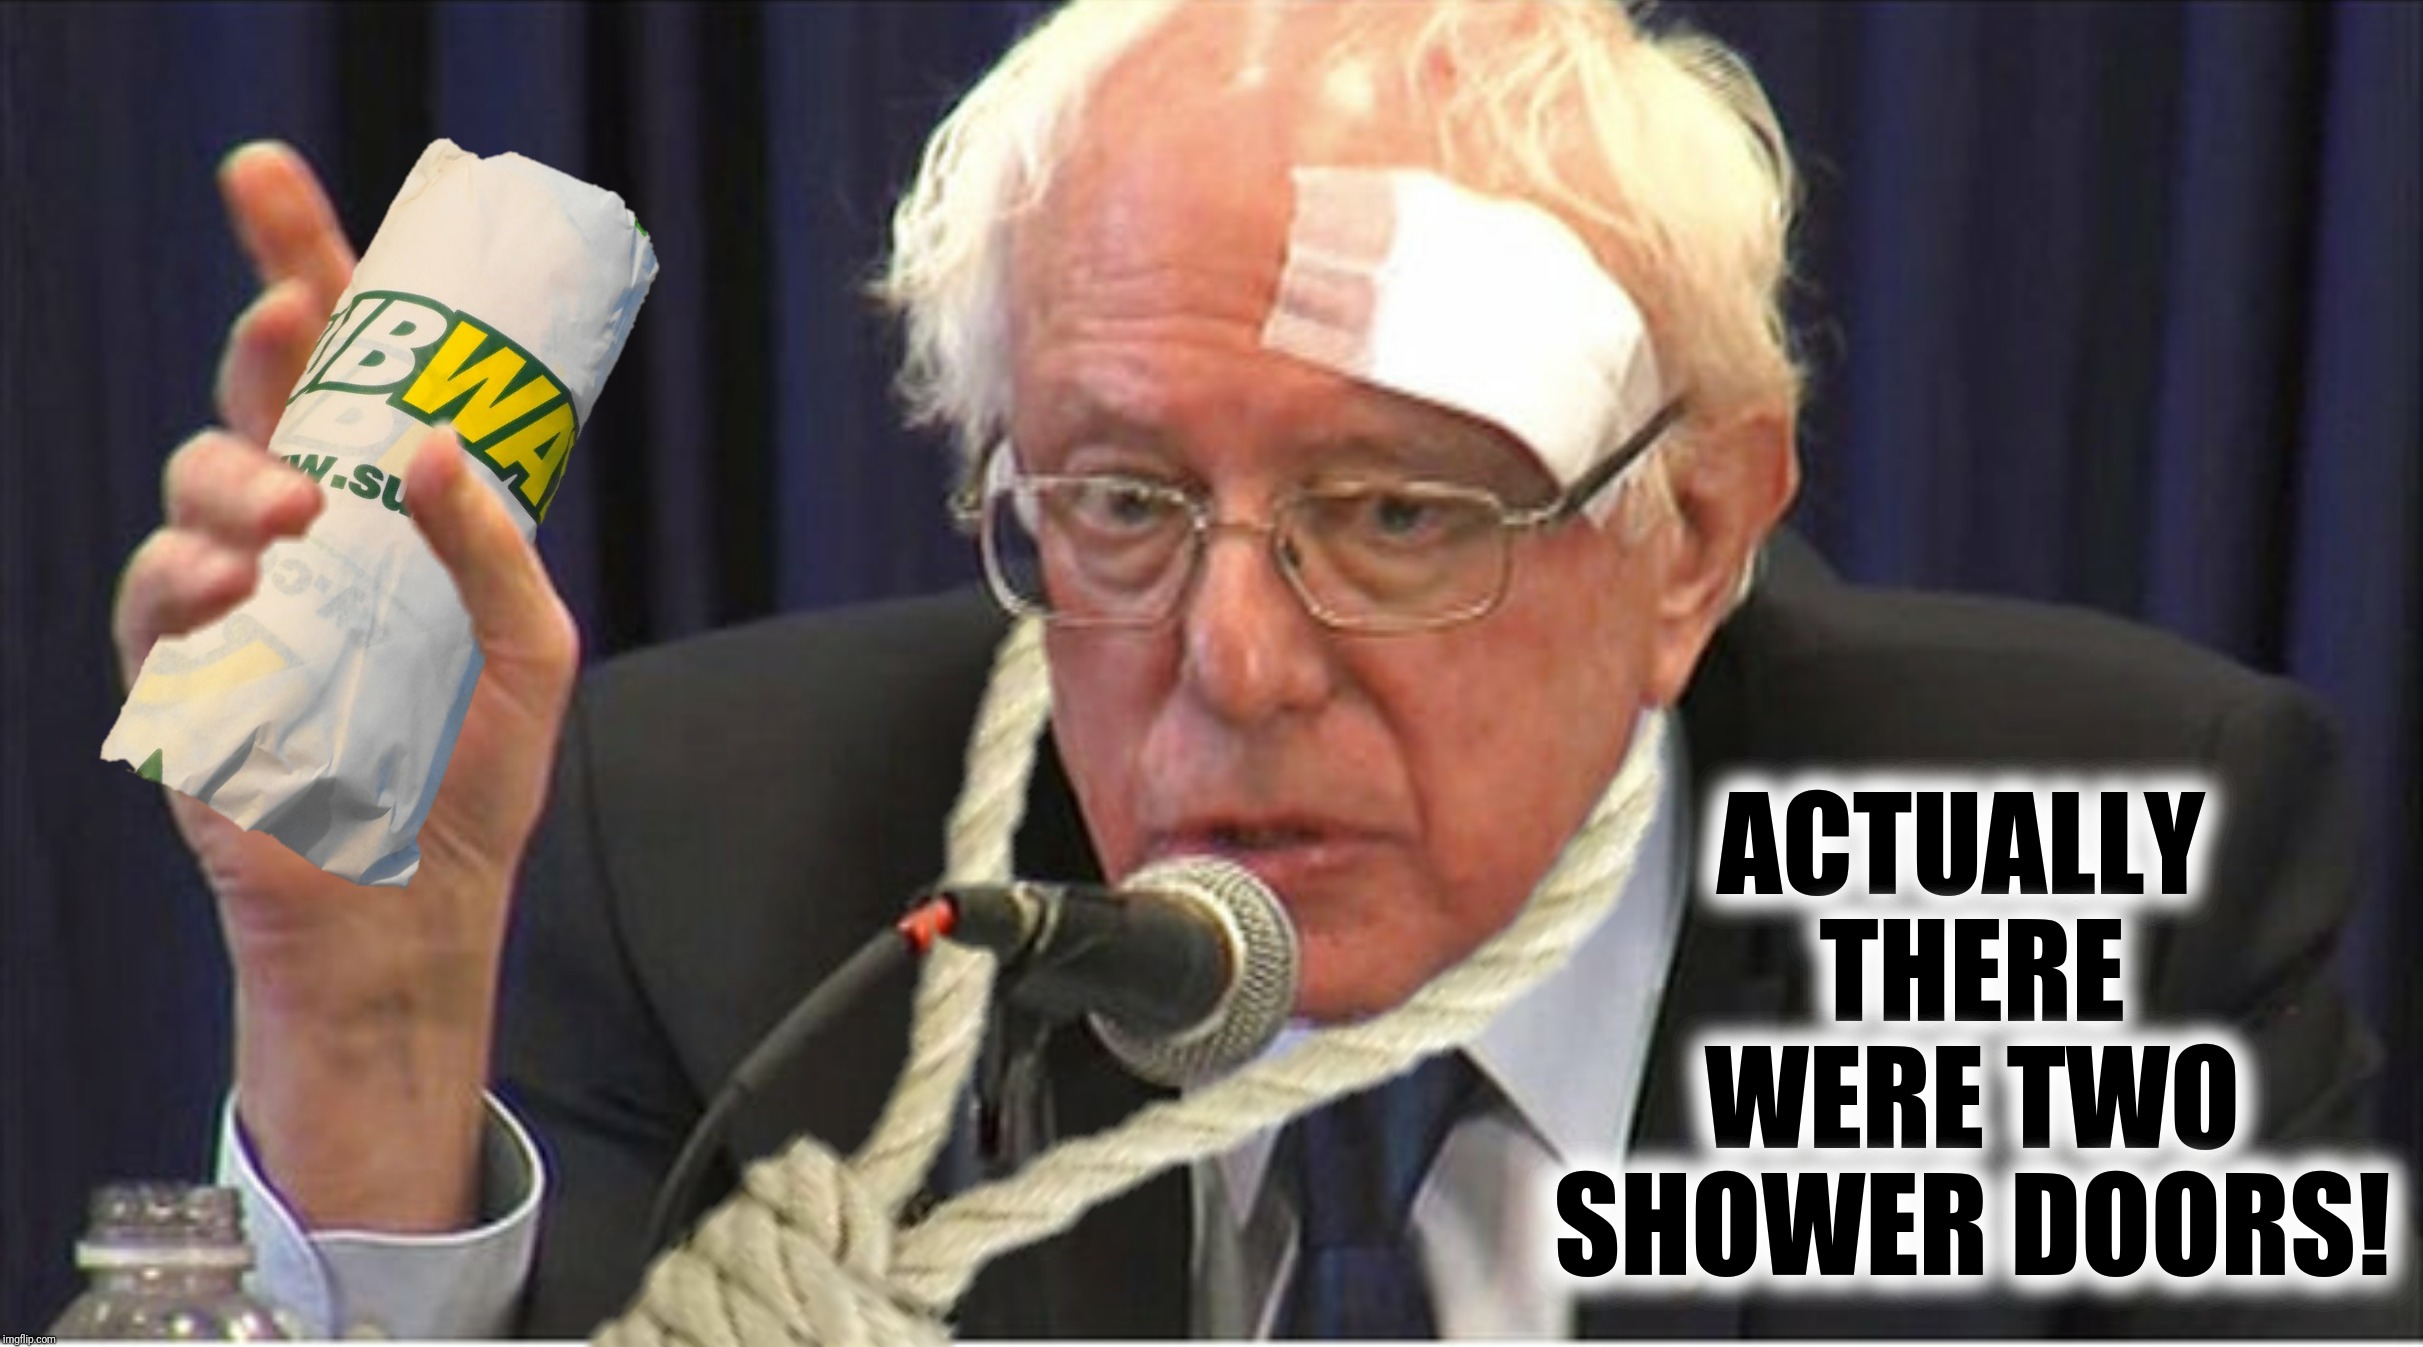 The face you make when you turn the bleach white | ACTUALLY THERE WERE TWO SHOWER DOORS! | image tagged in bernie sanders,shower door,subway,noose | made w/ Imgflip meme maker